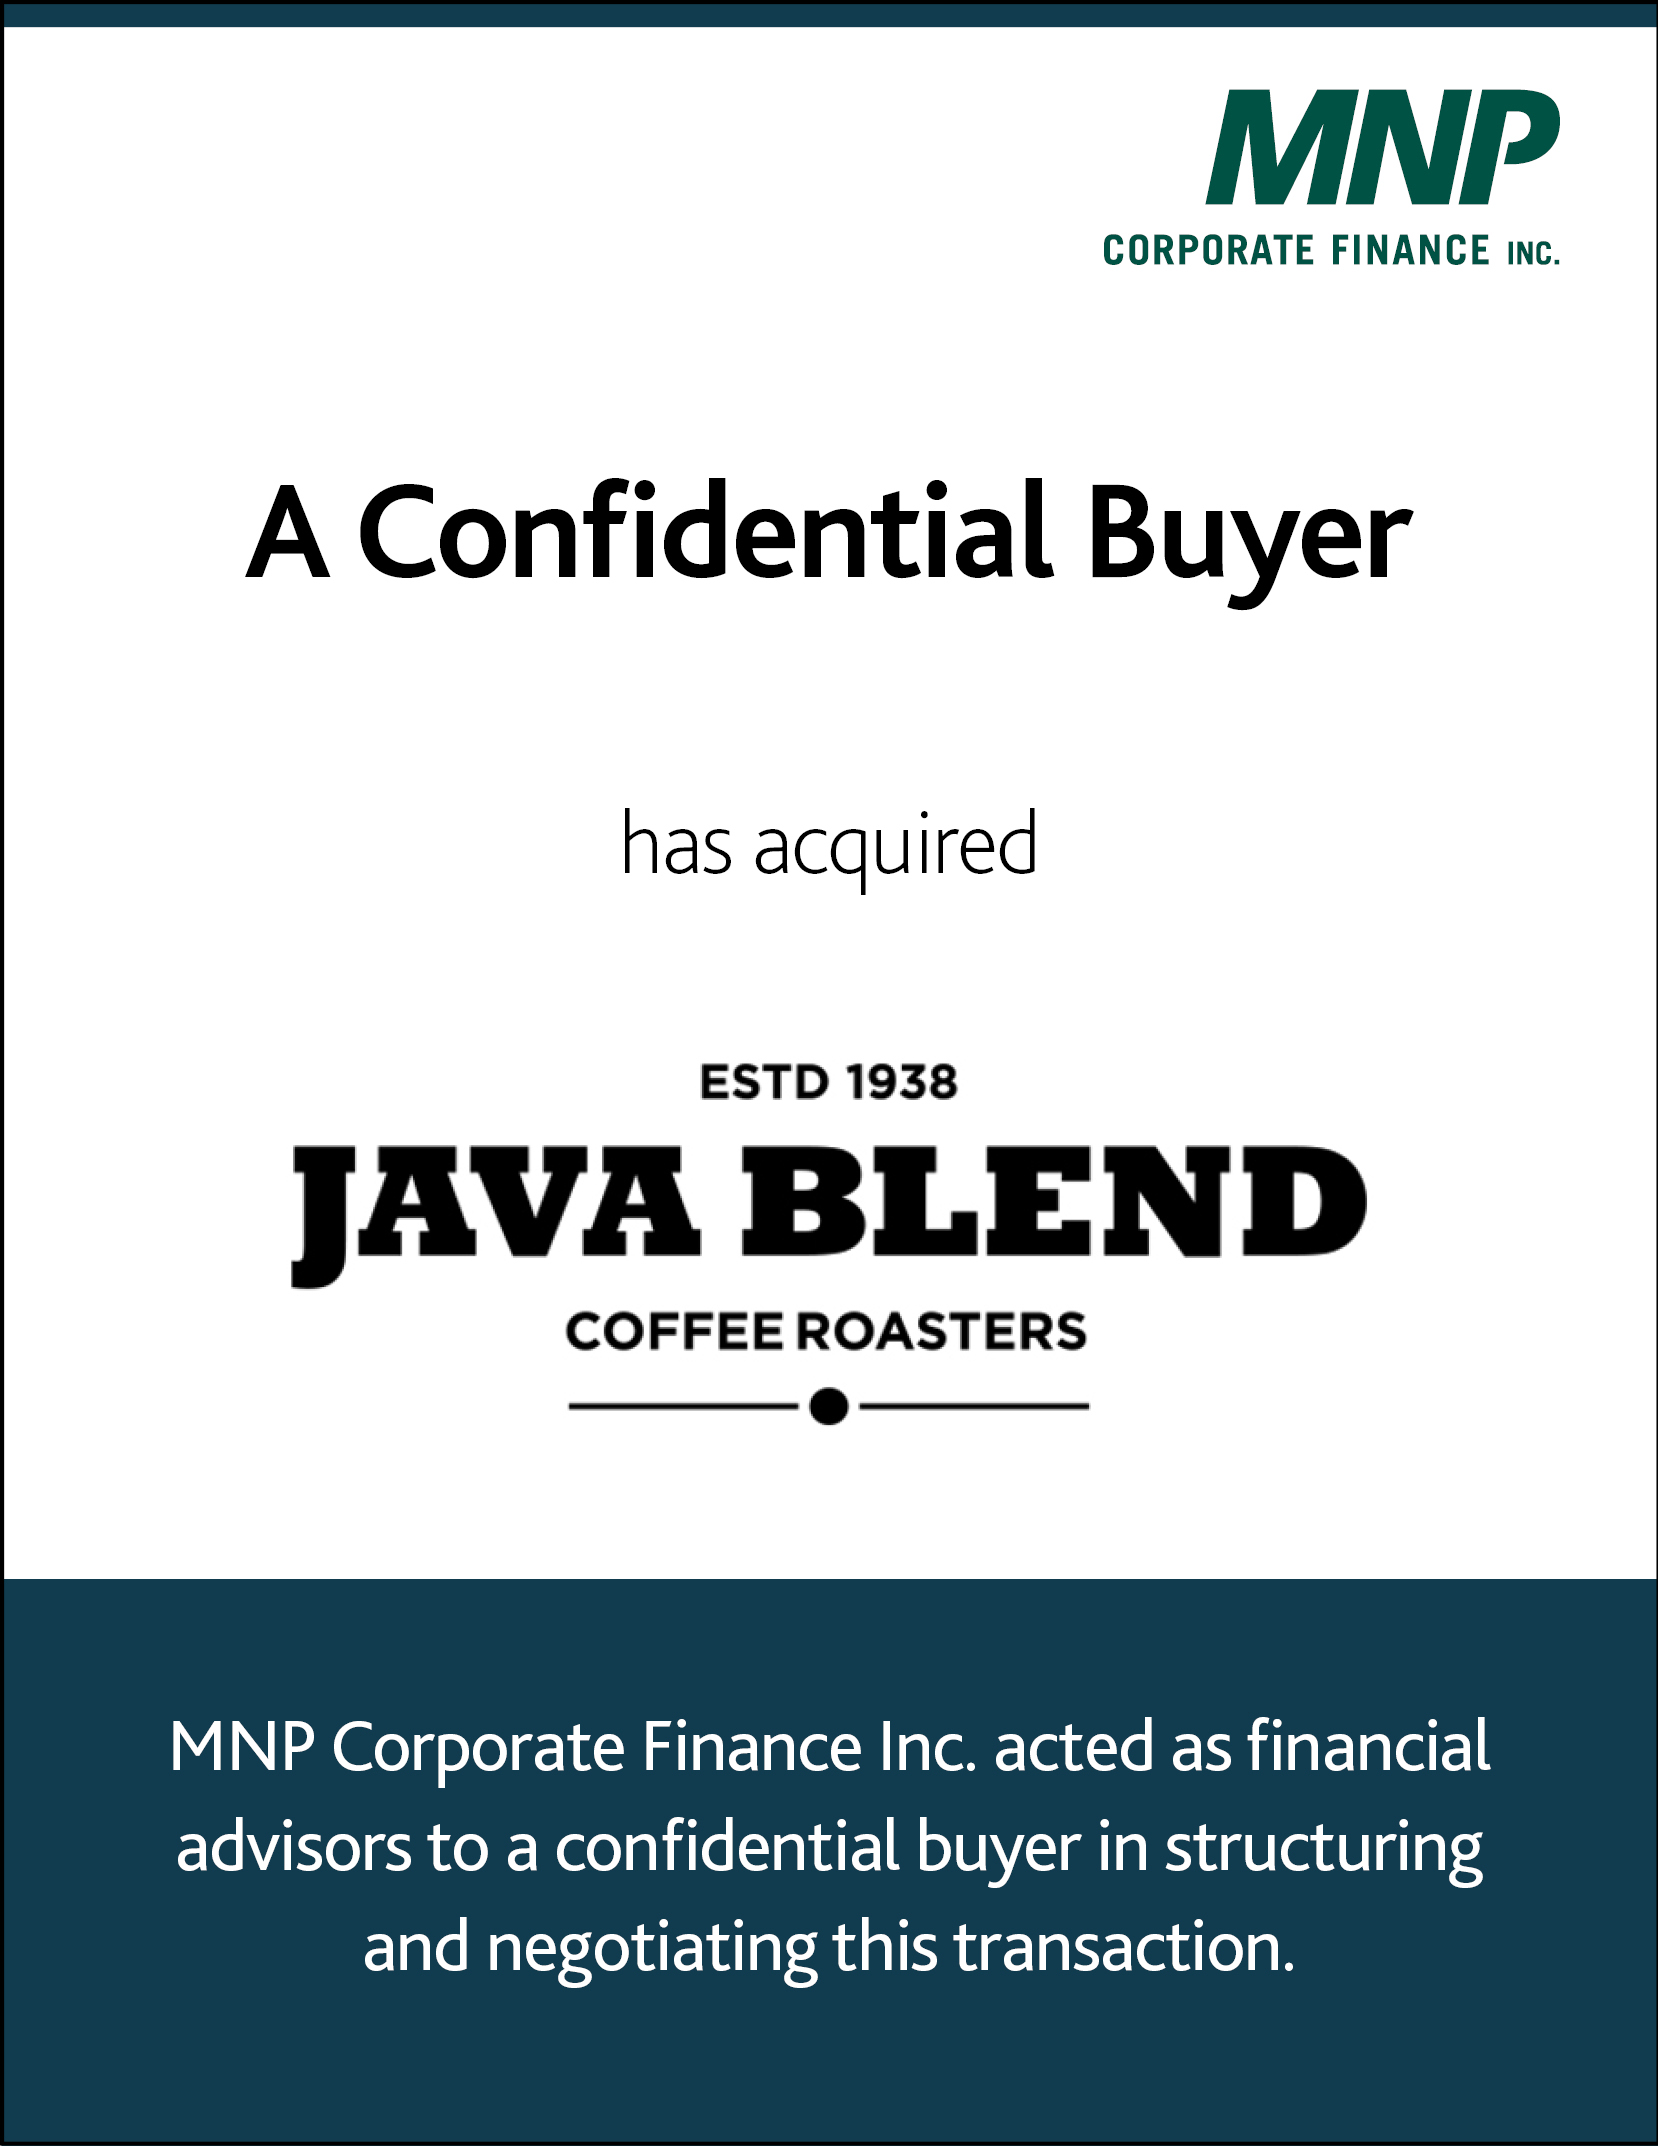 A Confidential Buyer has acquired Java Blend Coffee Roasters